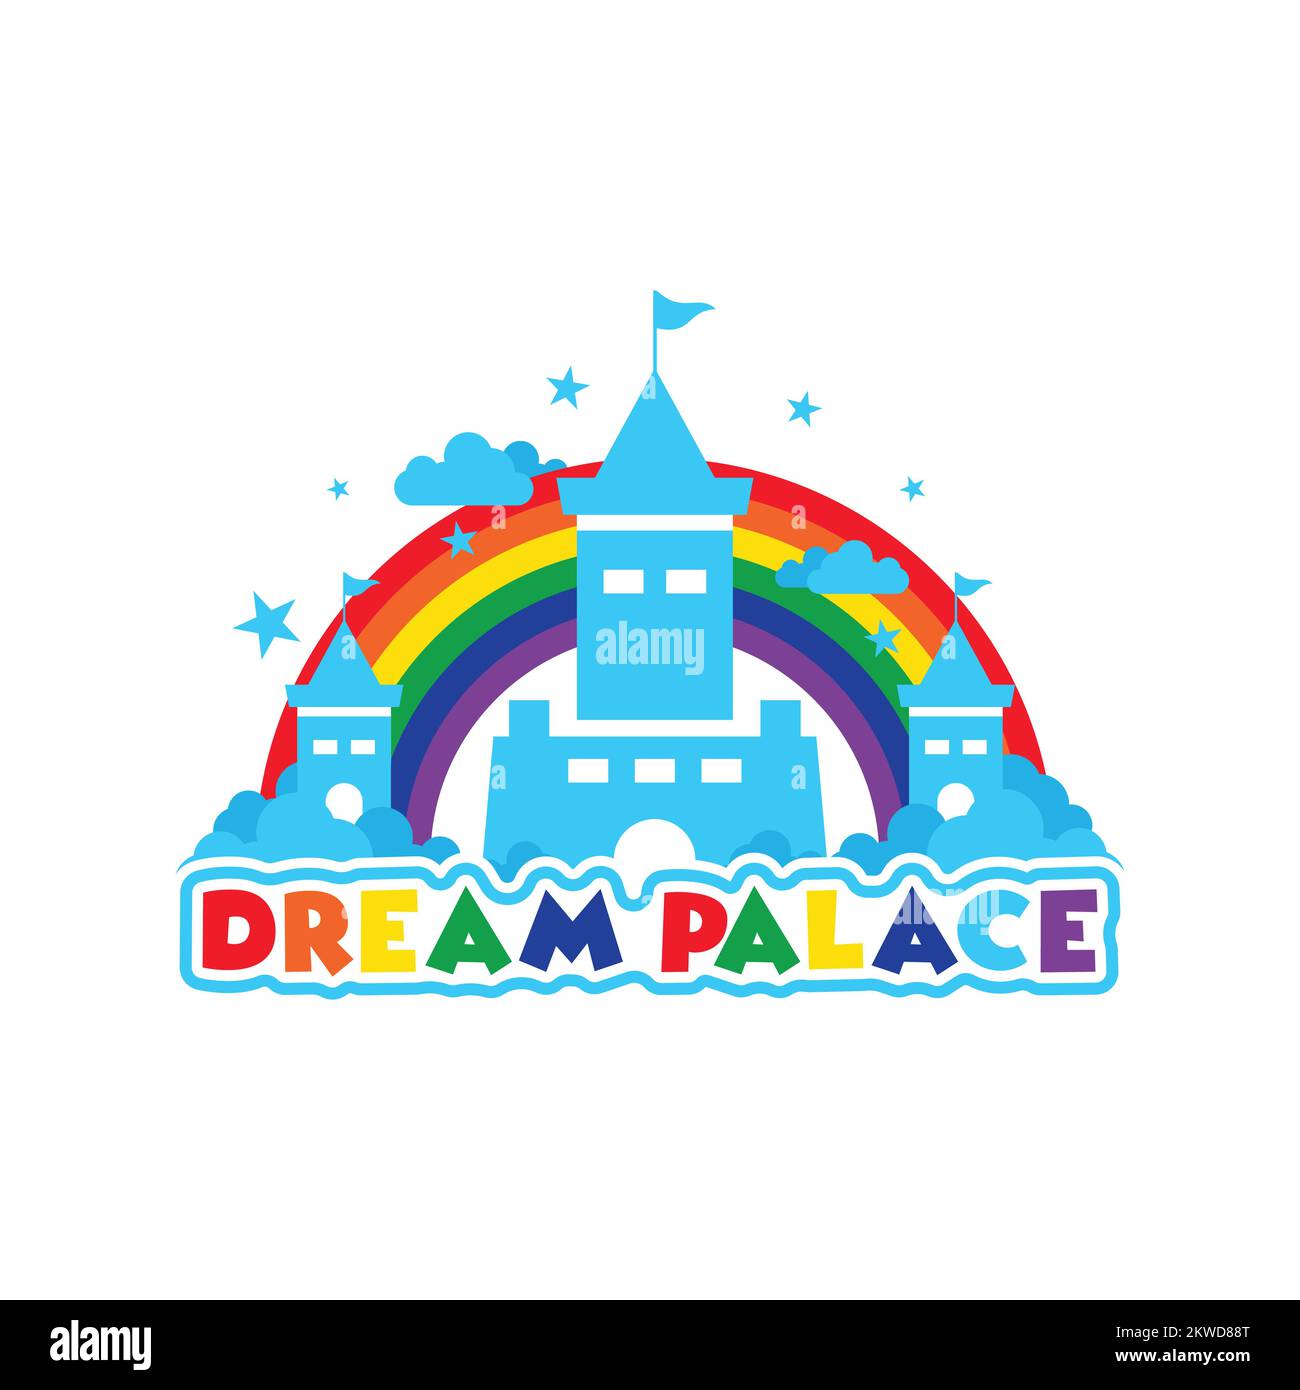 dream palace vector graphic element Stock Vector